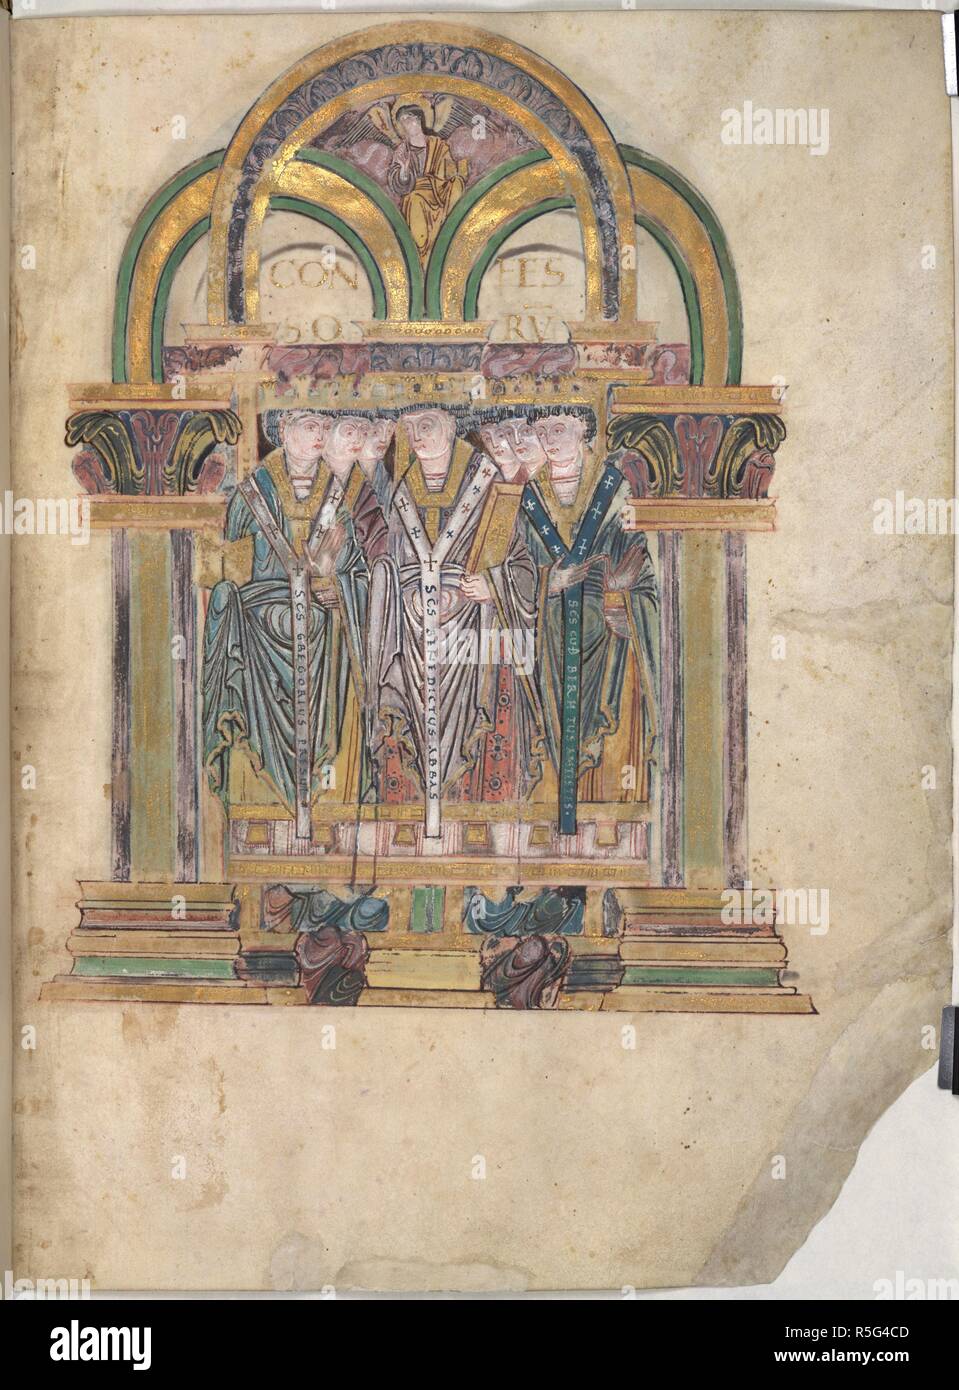 The Choir of Confessors. Benedictional of St. Aethelwold. Winchester; 971-984. [Whole folio] The first of the Seven Choirs of Saints; the Choir of Confessors, set within an arched frame. Seven crowned saints, including Saint Benedict, shown in the centre, as the founder the Benedictine Order, and the Rule by which Aethelwold and his colleagues lived. Either side, St. Gregory the Great and St. Cuthbert; both monks were associated with the early flowering of monasrtic culture in England before the Viking invasions  Image taken from Benedictional of St. Aethelwold.  Originally published/produced  Stock Photo